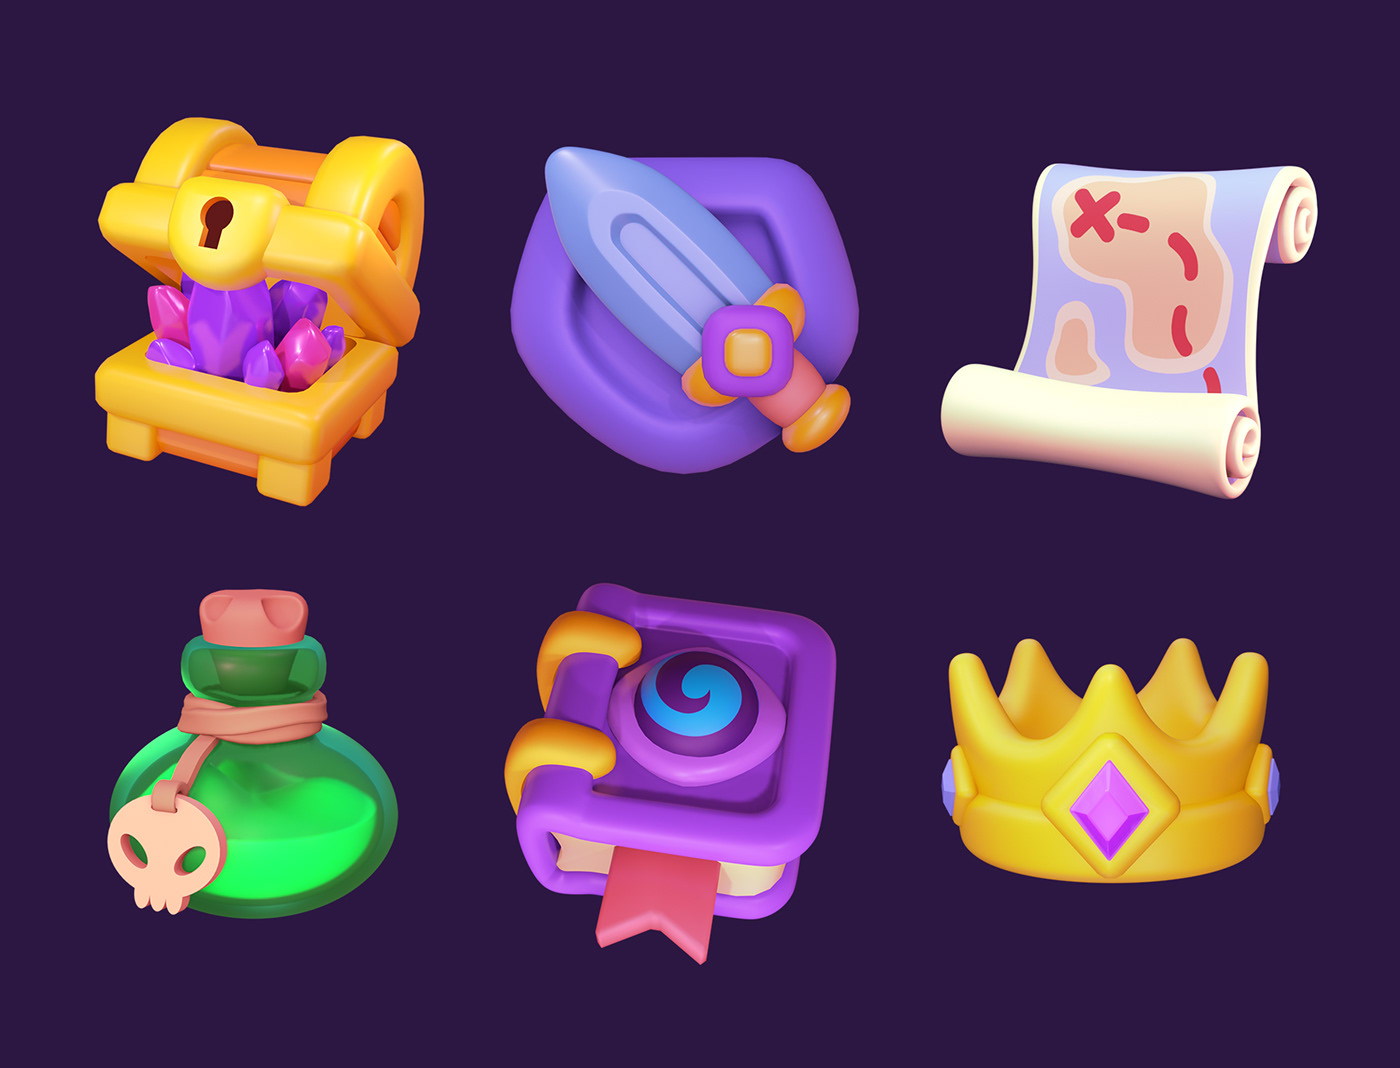 Game Art props 3D cartoon stylized icons